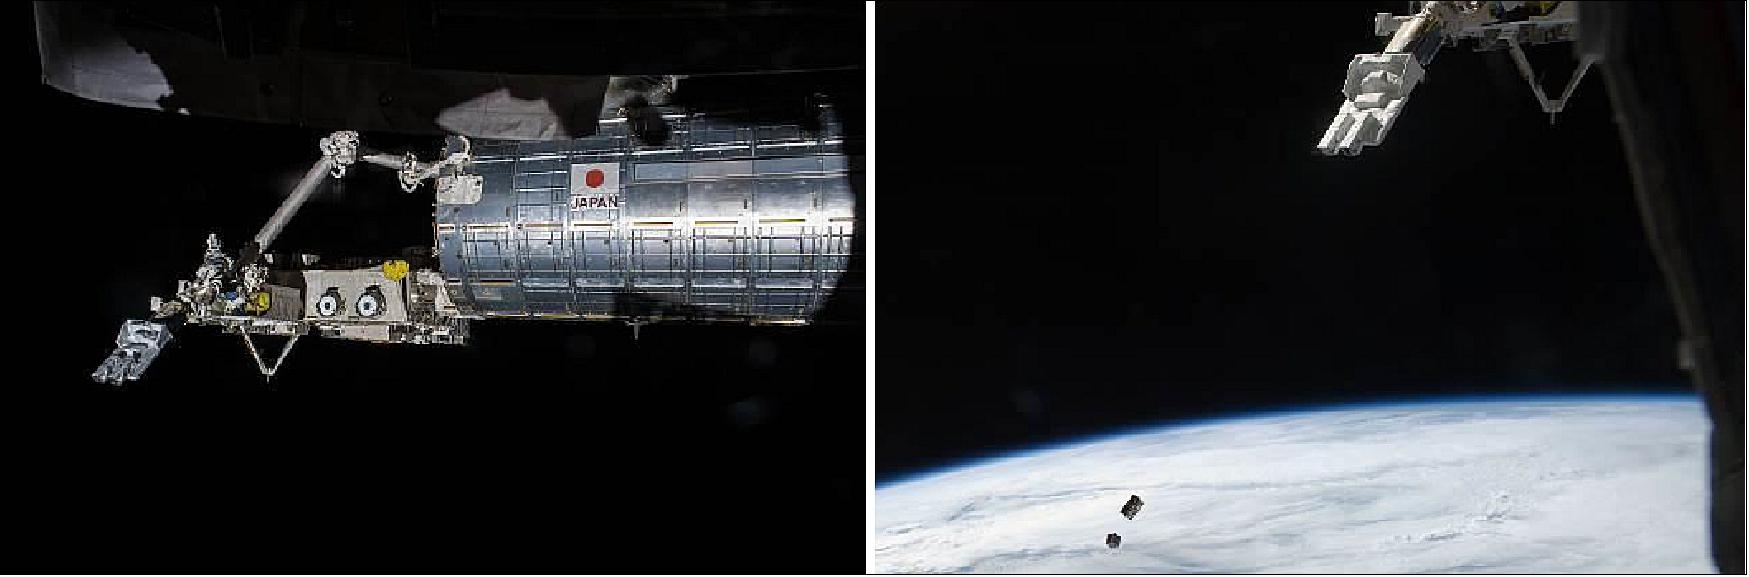 Figure 28: Operation for the satellite deployment. Left: Maneuver the MPEP to the appropriate deployment position; Right: The CubeSats in space after deployment (image credit JAXA/NASA)